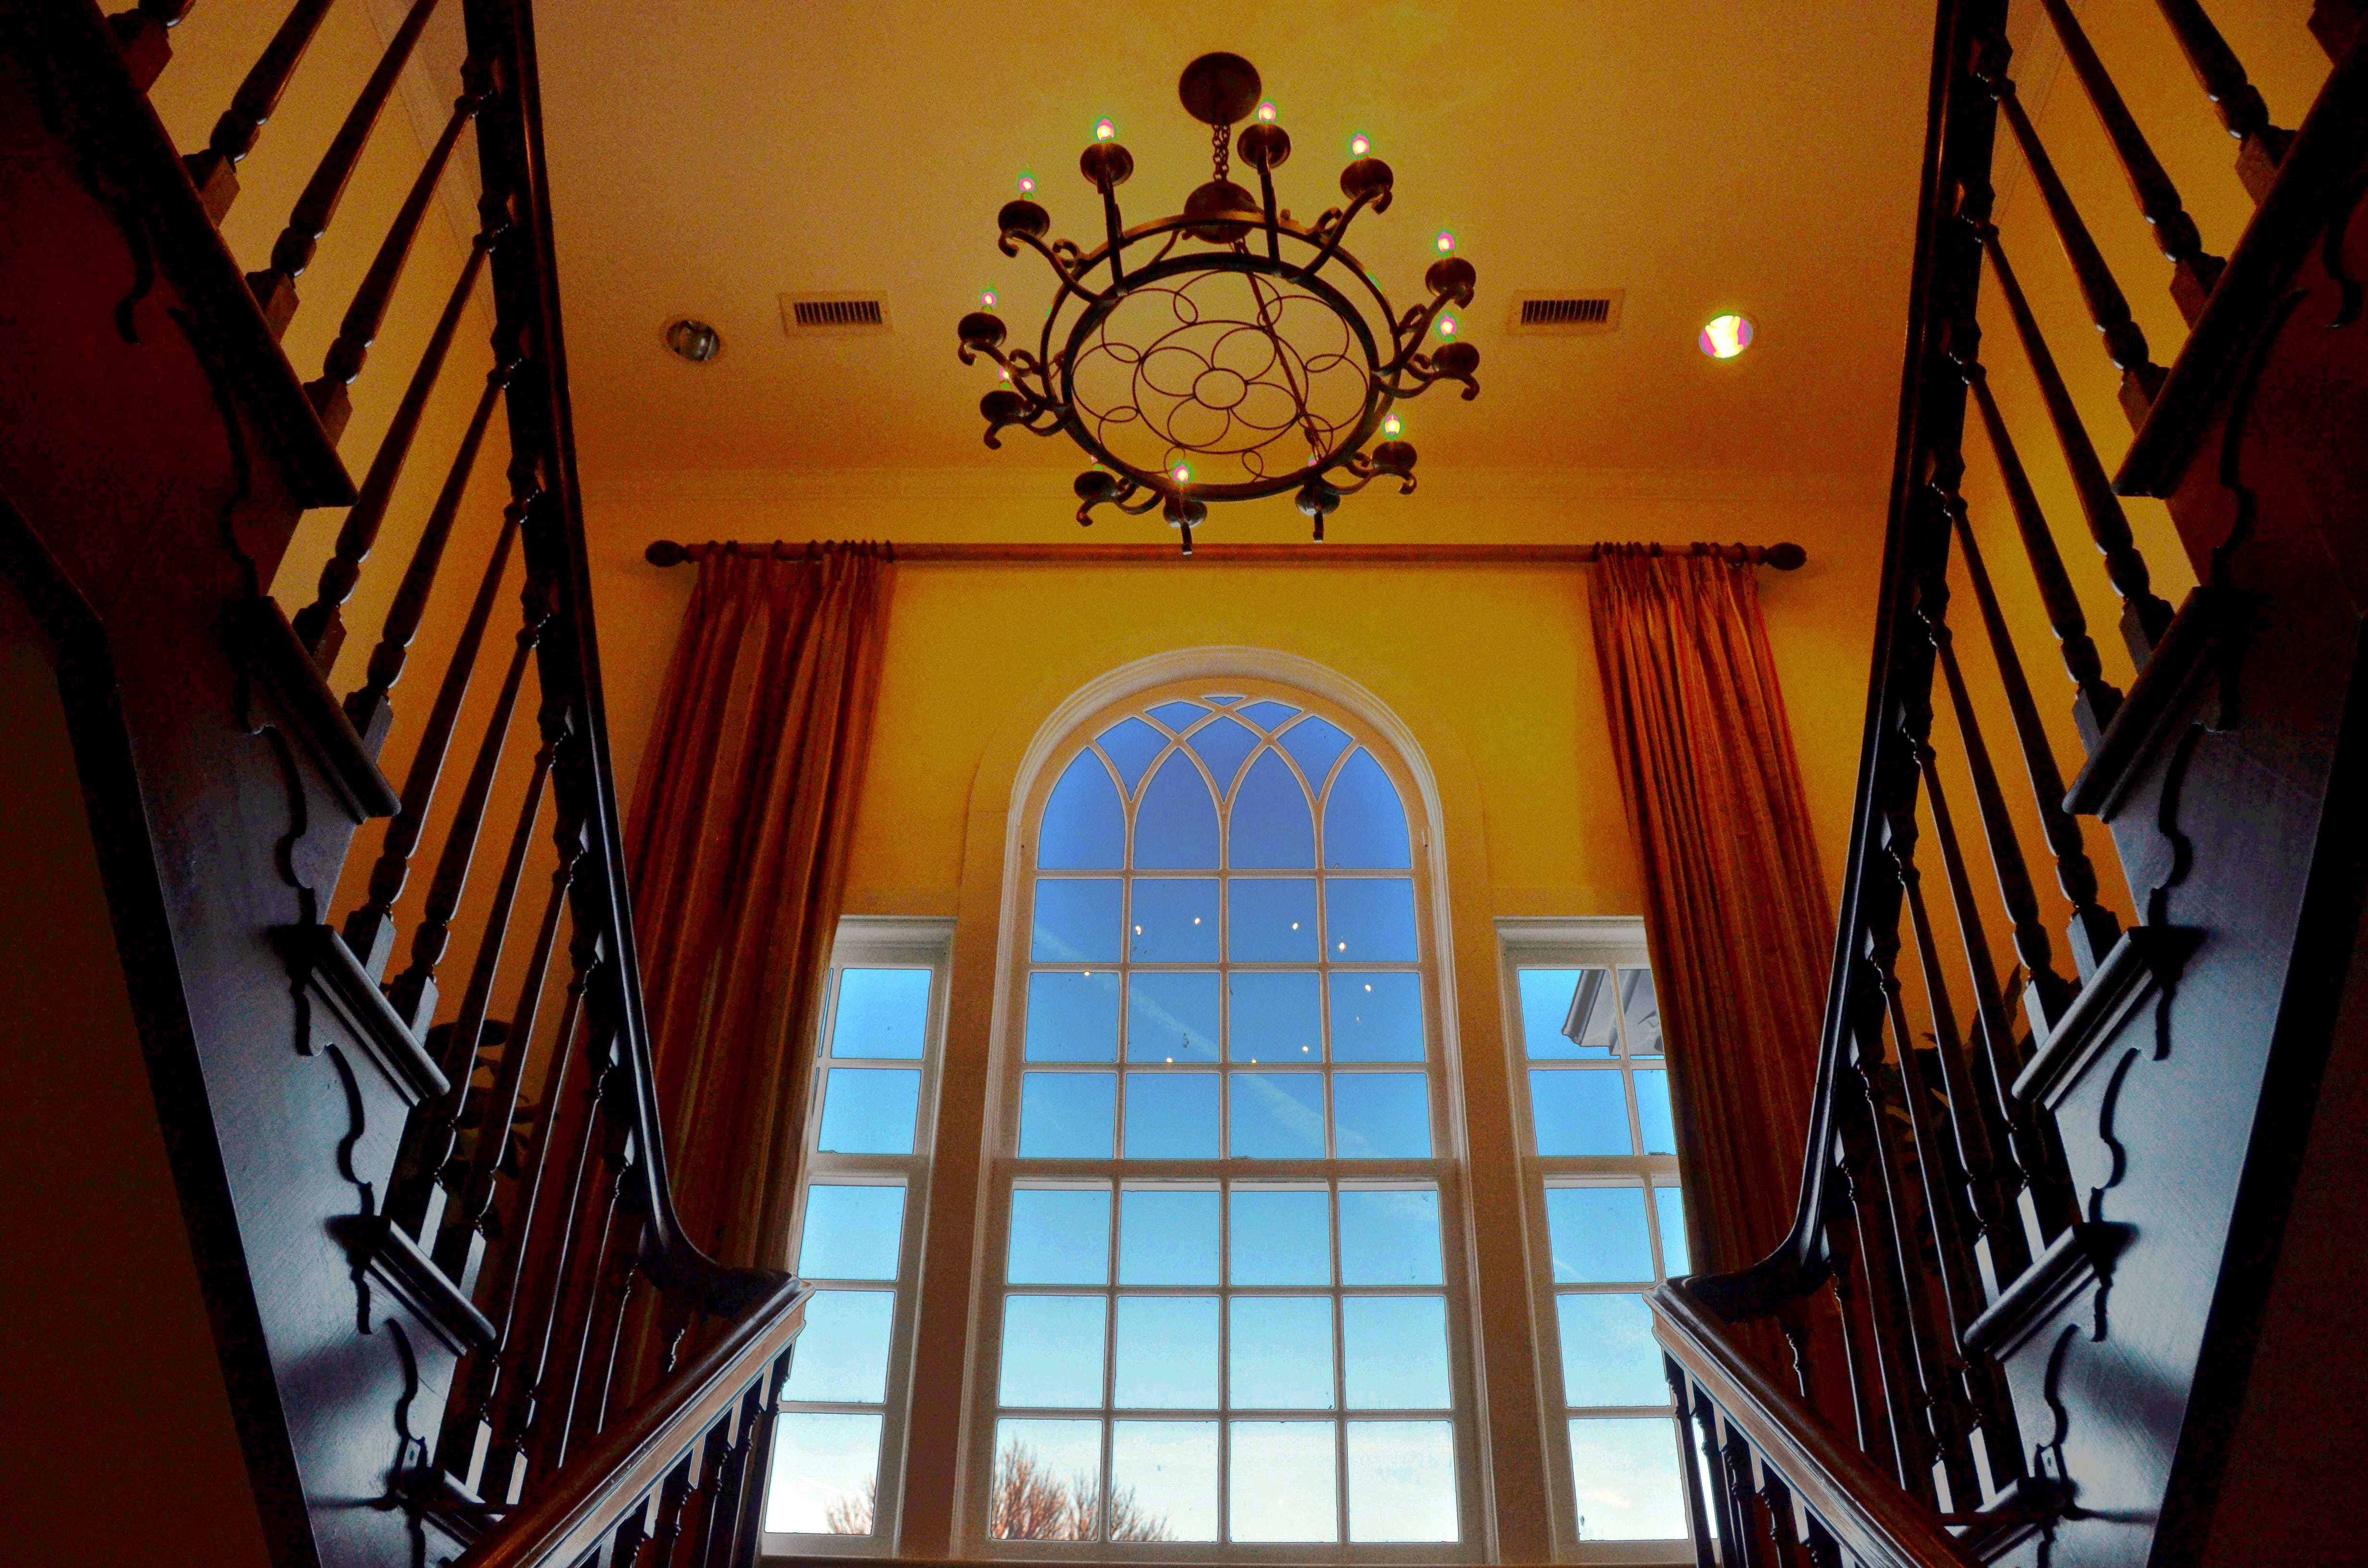 An upward looking shot of a large window and the chandelier at the entrance of the manor.